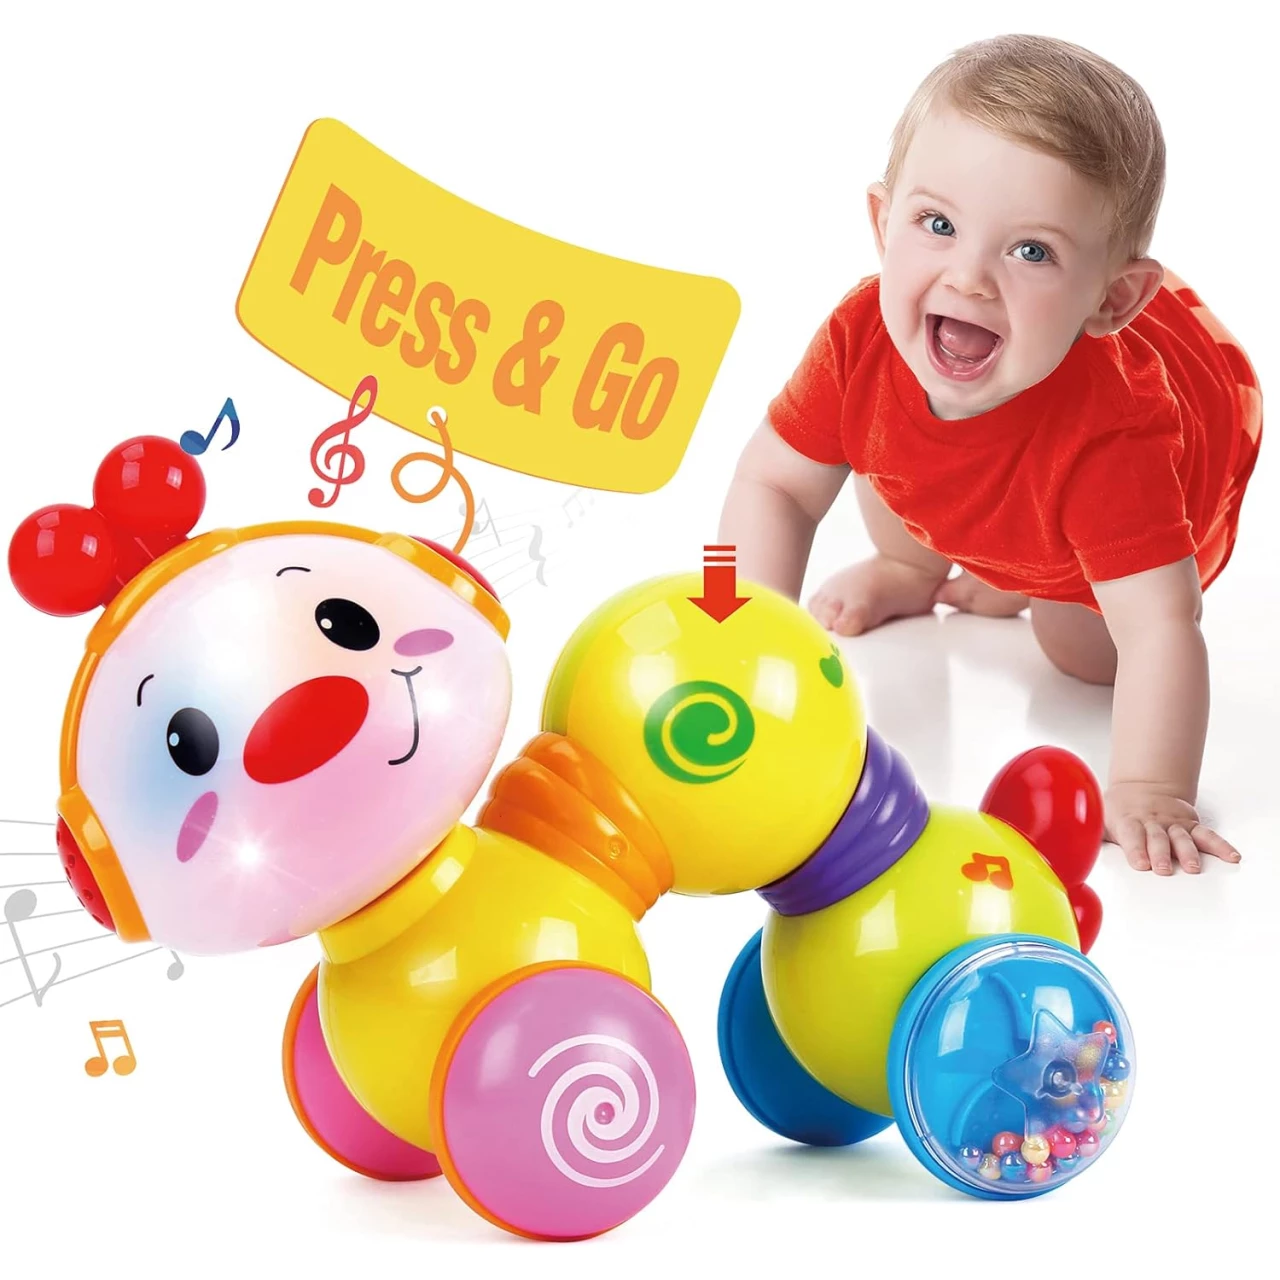 Baby Toys 6 to 12 Months - Musical, Sounds, Light up, Press &amp; Go Baby Toys for 1 Year Old - Motor Skills Cause and Effect Toys for Babies 6-12 Months - 6 7 8 9 Month Old Baby &amp; Toddler Toys Age 1-2